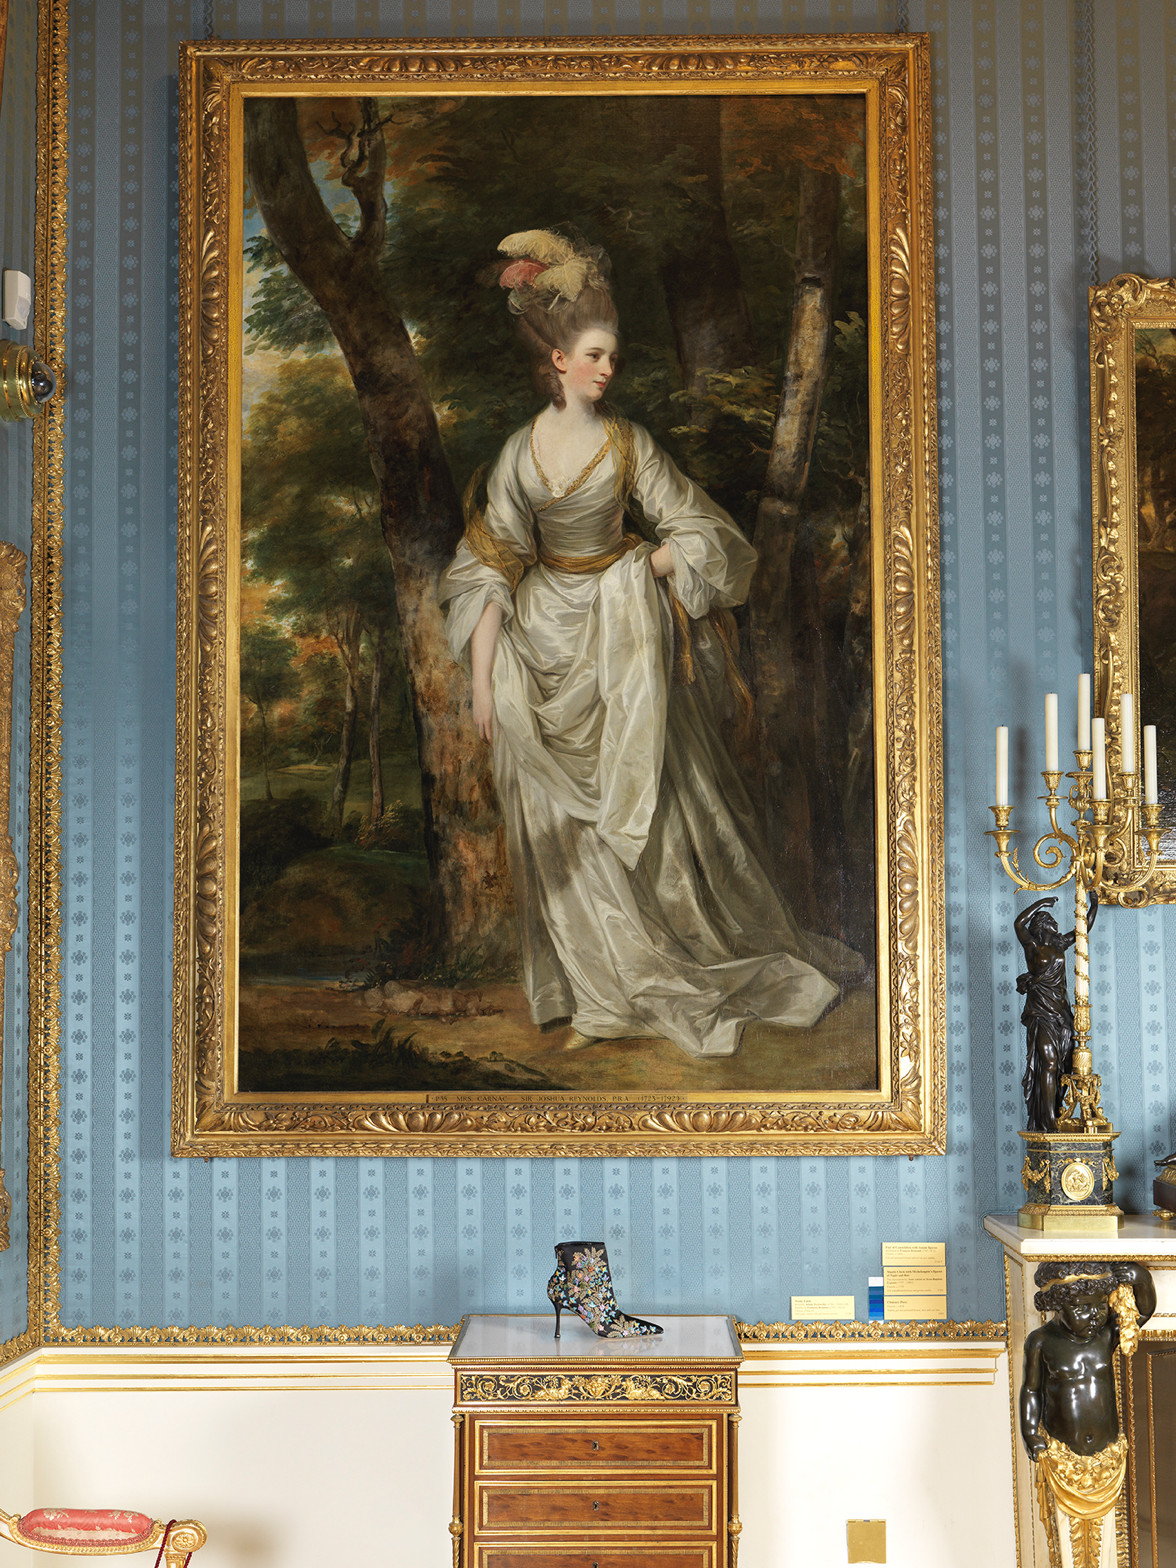 The Lepanto boot is positioned in front of Joshua Reynold’s painting of Mrs Elizabeth Carnac.